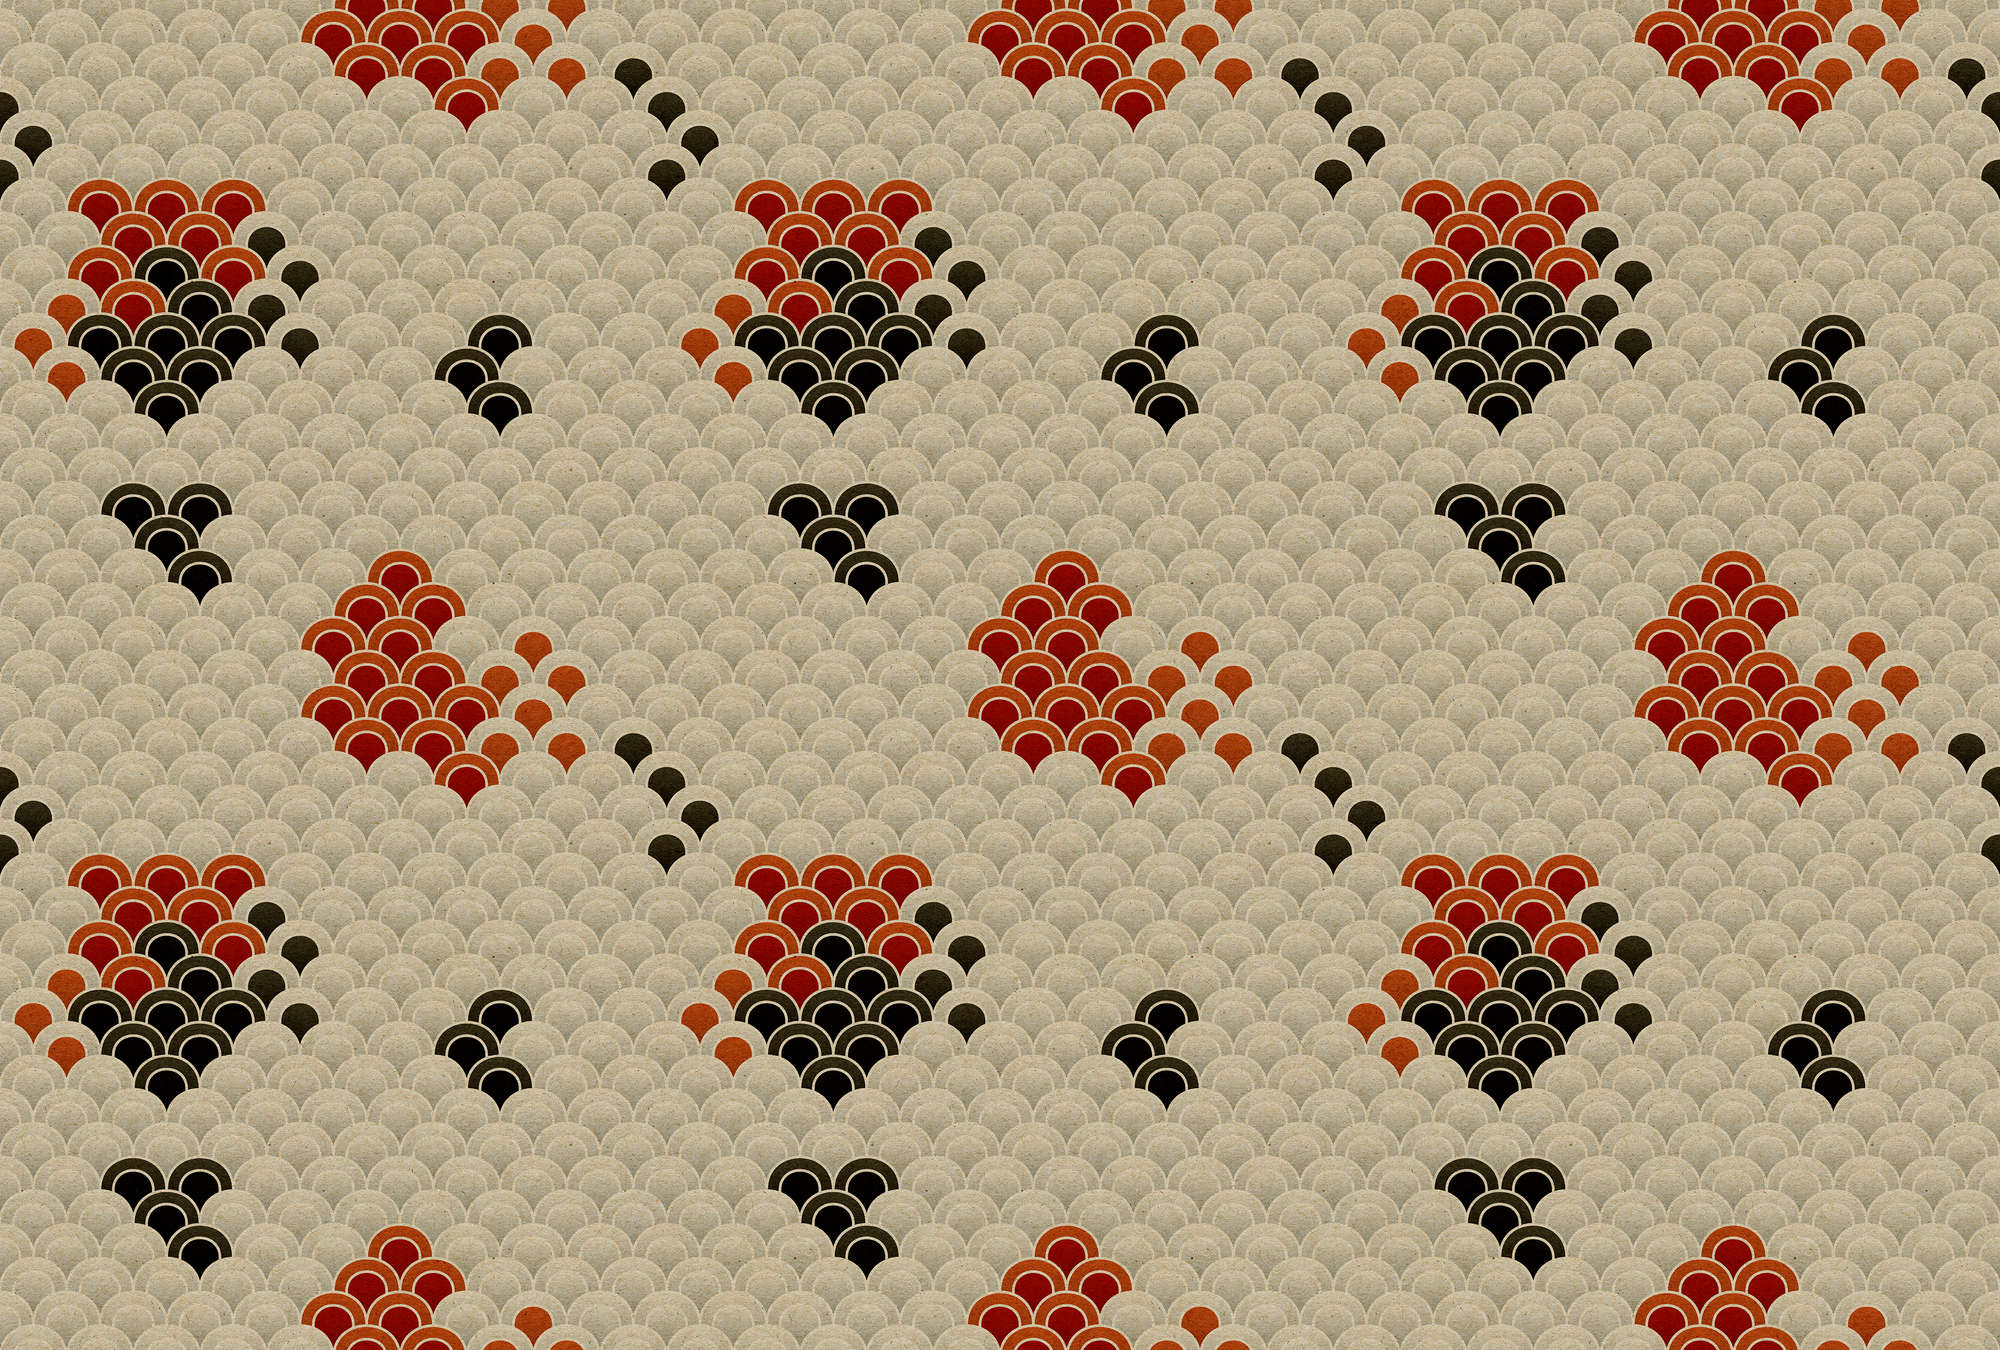             Koi 2 - Koi digital print on cardboard structure, abstract & stylised - Beige, Red | mother-of-pearl smooth fleece
        